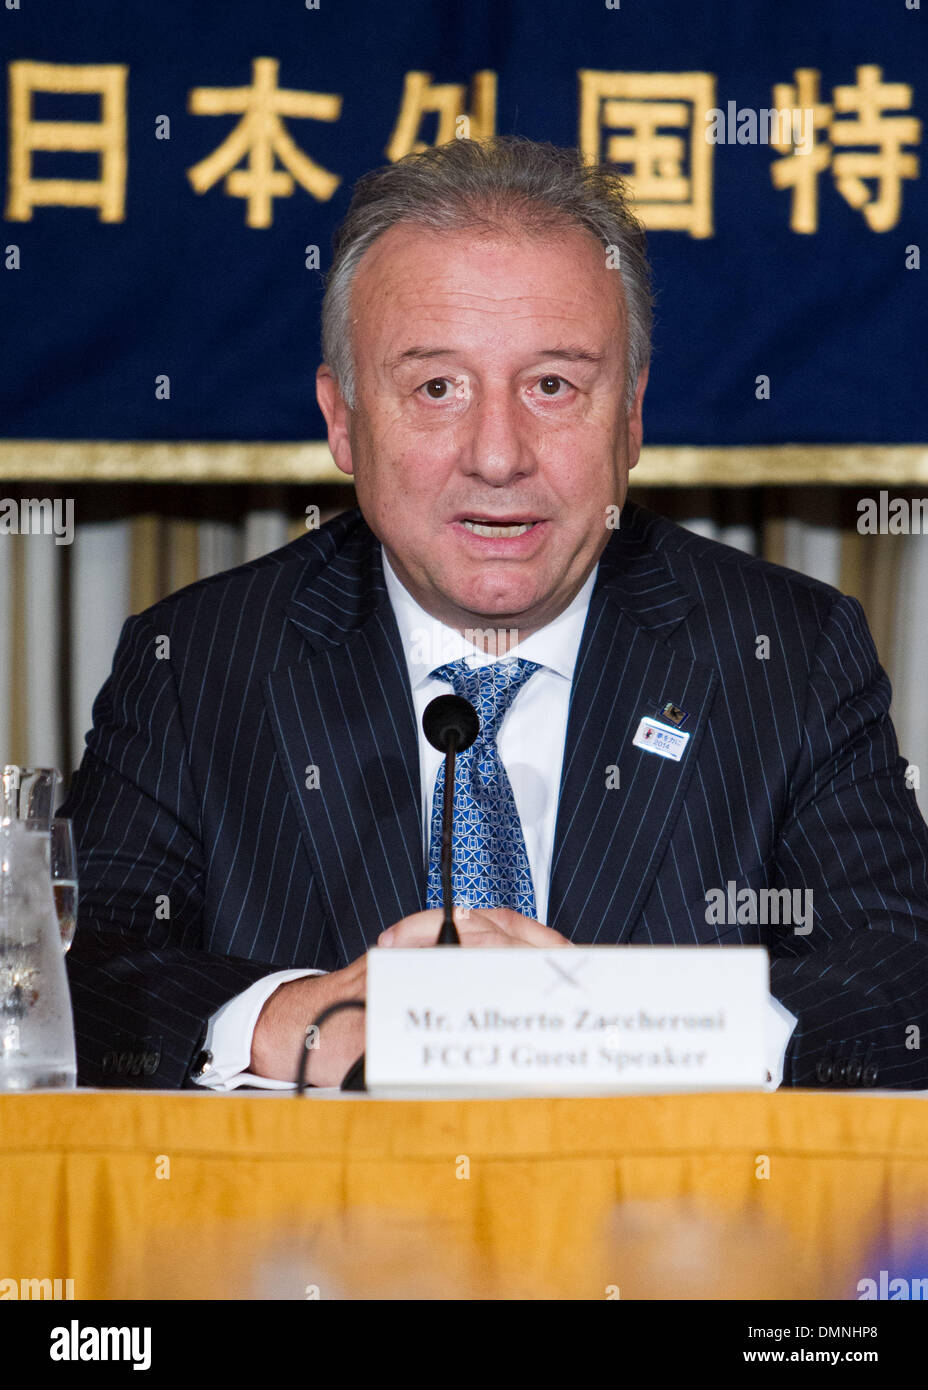 Tokyo, Japan. 16th Dec, 2013. Alberto Zaccheroni, Italian head coach of Japan's National Football Team, speaks to the media during a news conference at Tokyo's Foreign Correspondents' Club of Japan on Monday, December 16, 2013. Zaccheroni expressed his views on Japan's chances at the 2014 FIFA World Cup in Brazil. Credit:  AFLO/Alamy Live News Stock Photo